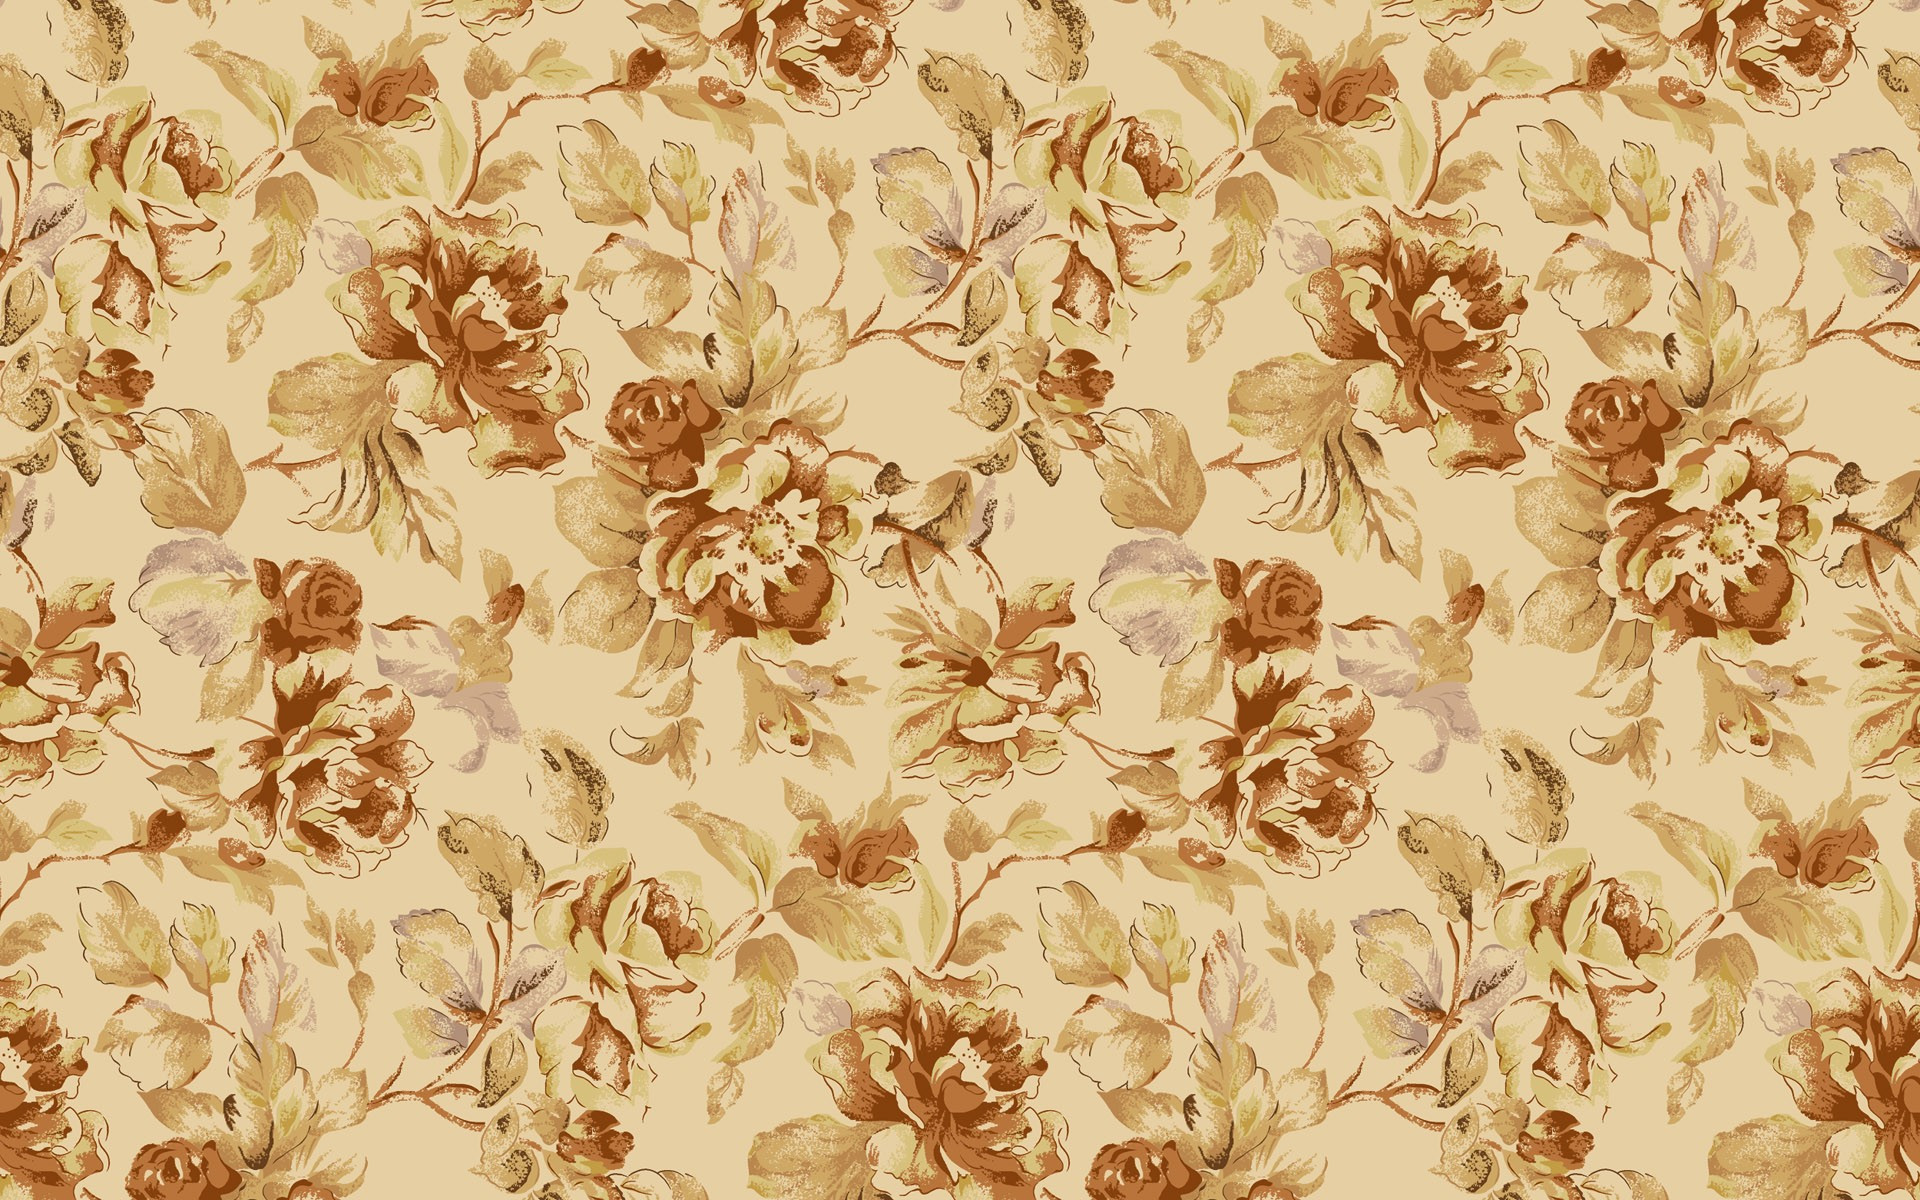 Vintage Floral Wallpaper Full HD Search